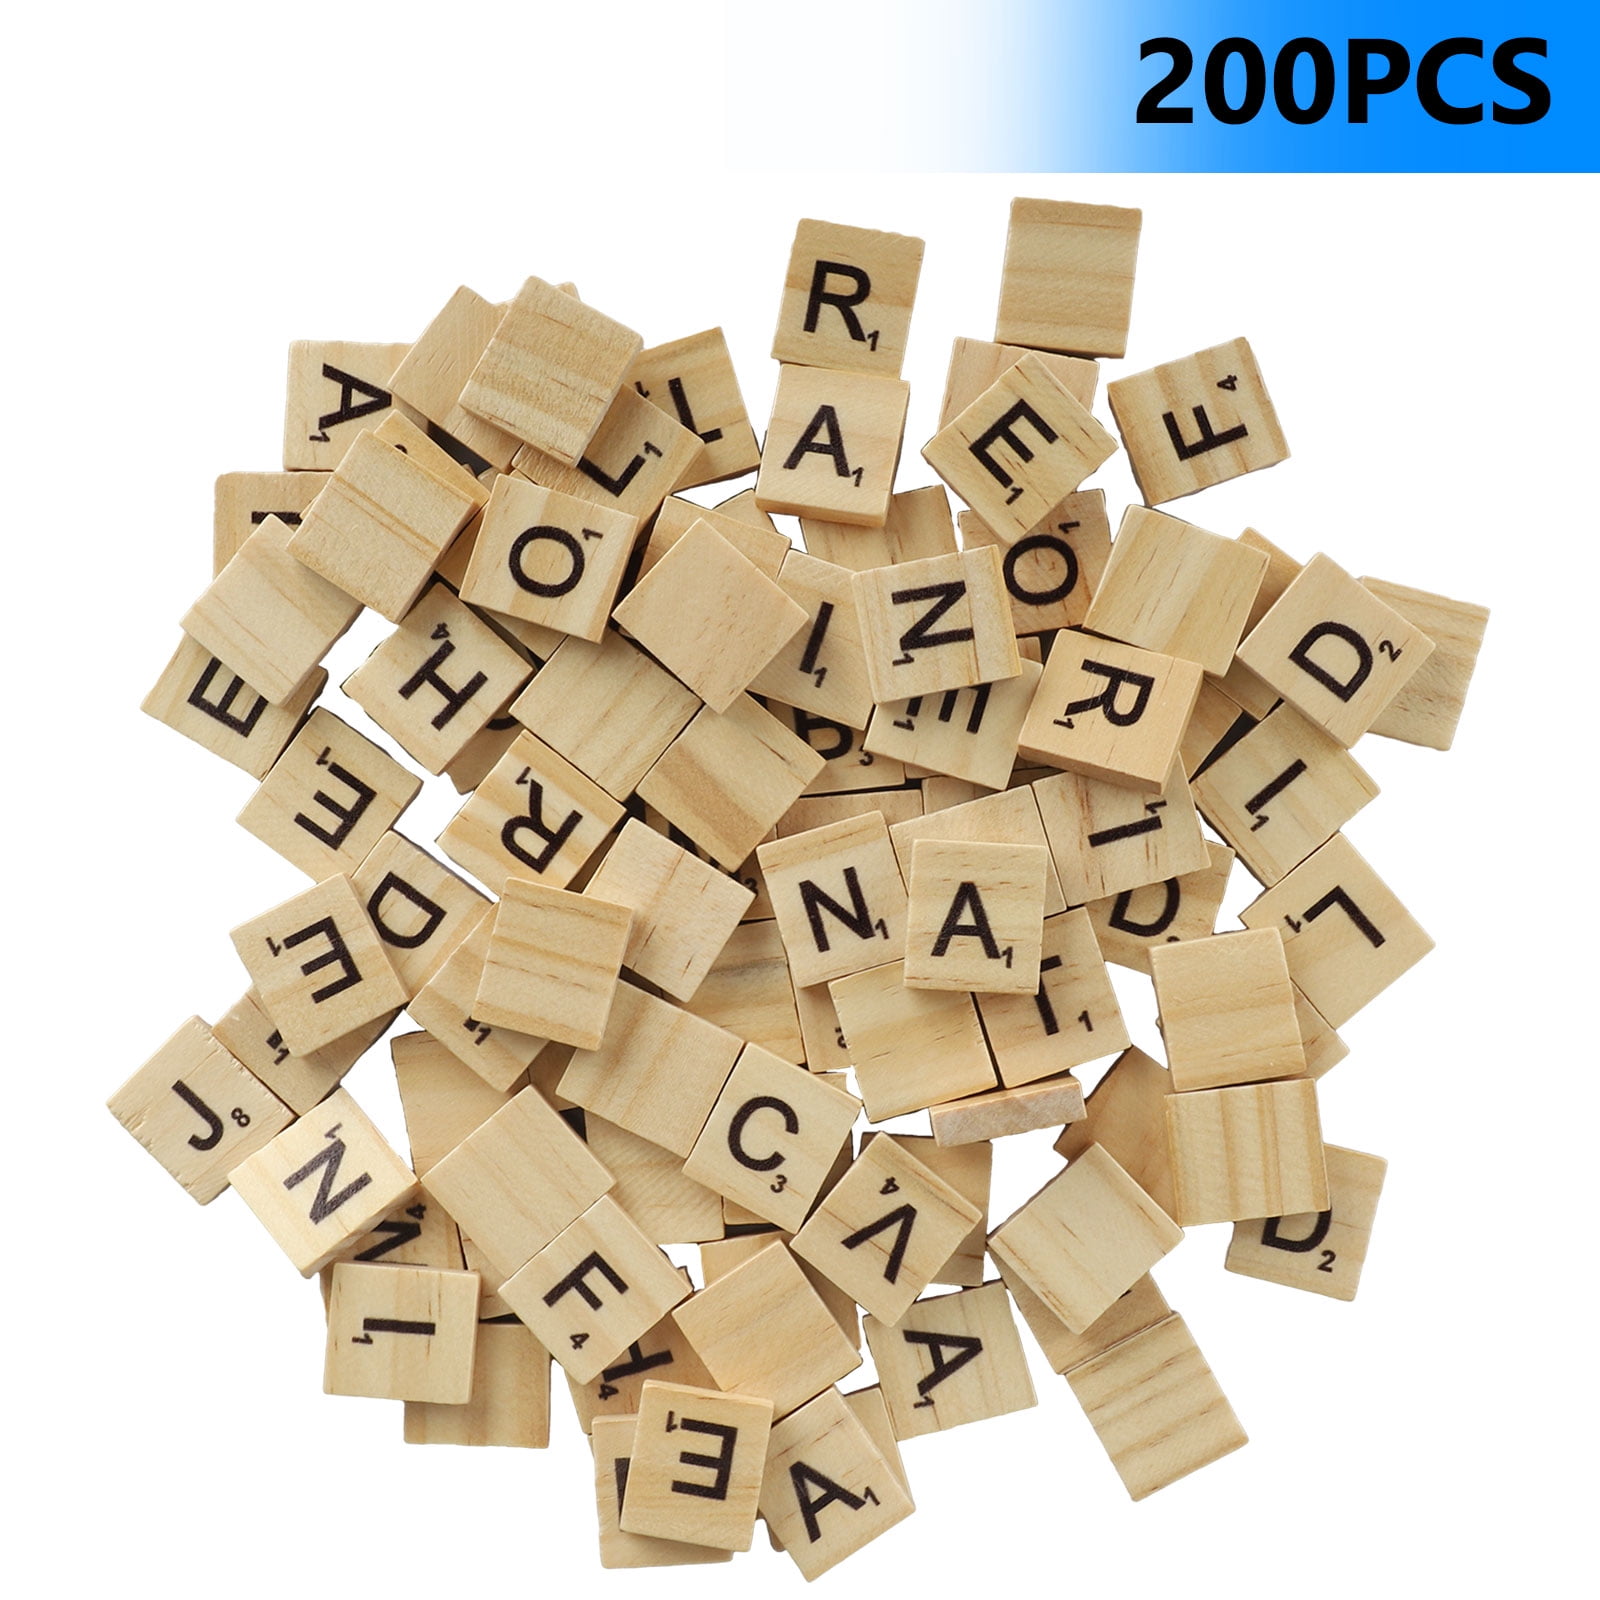 High Quality Wooden Tiles Scrabble Tiles Letters & Numbers Art sets UK 